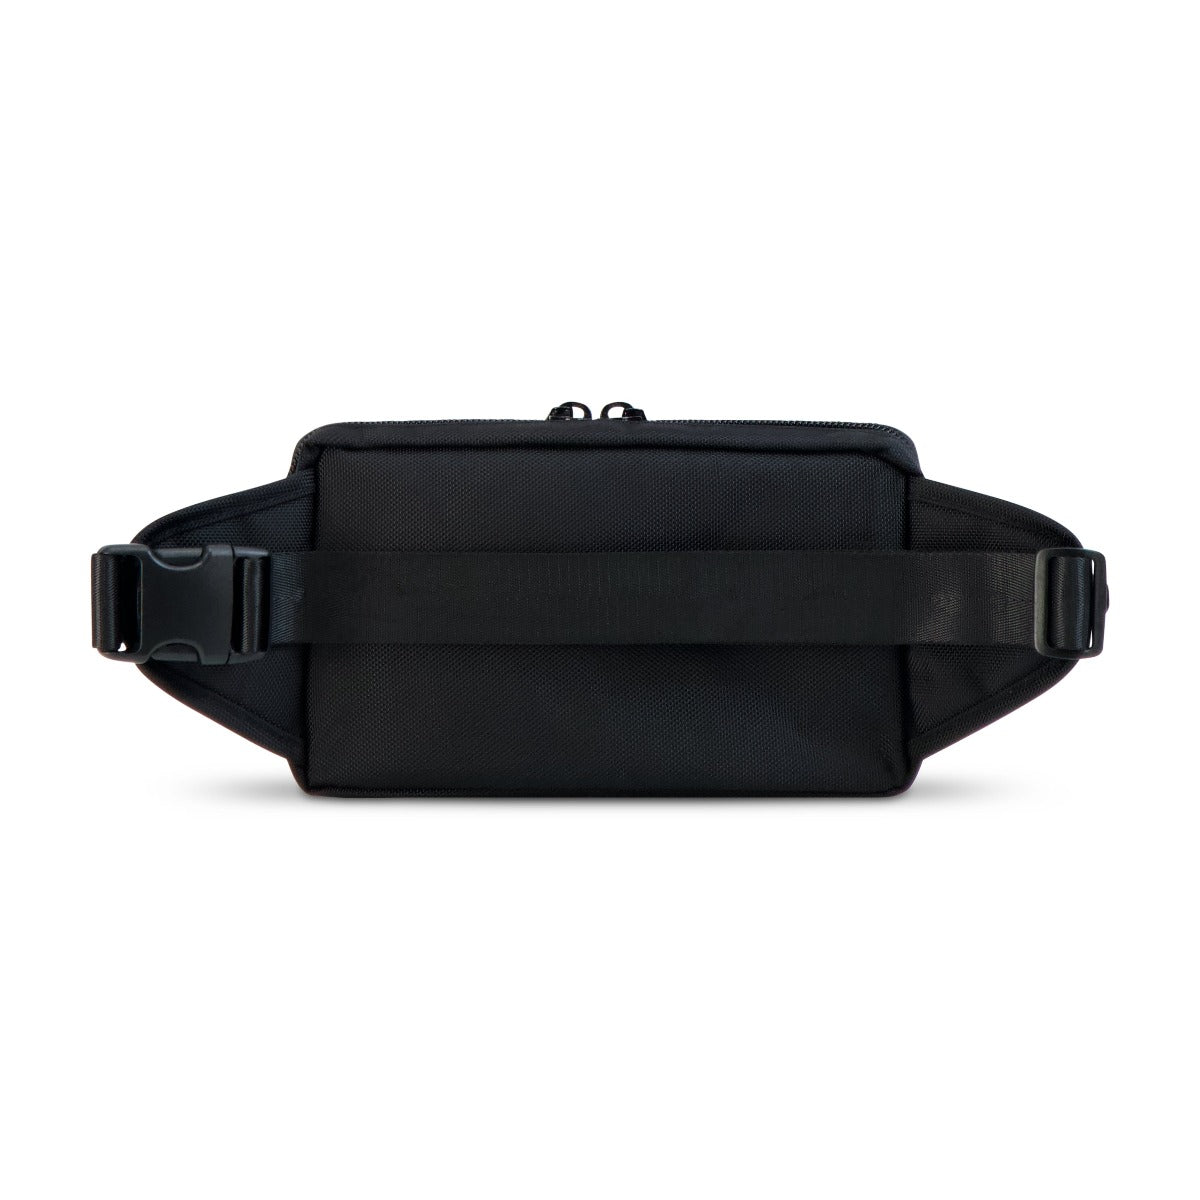 Ful tactics collection scout waistpack black - best fanny packs for travelling